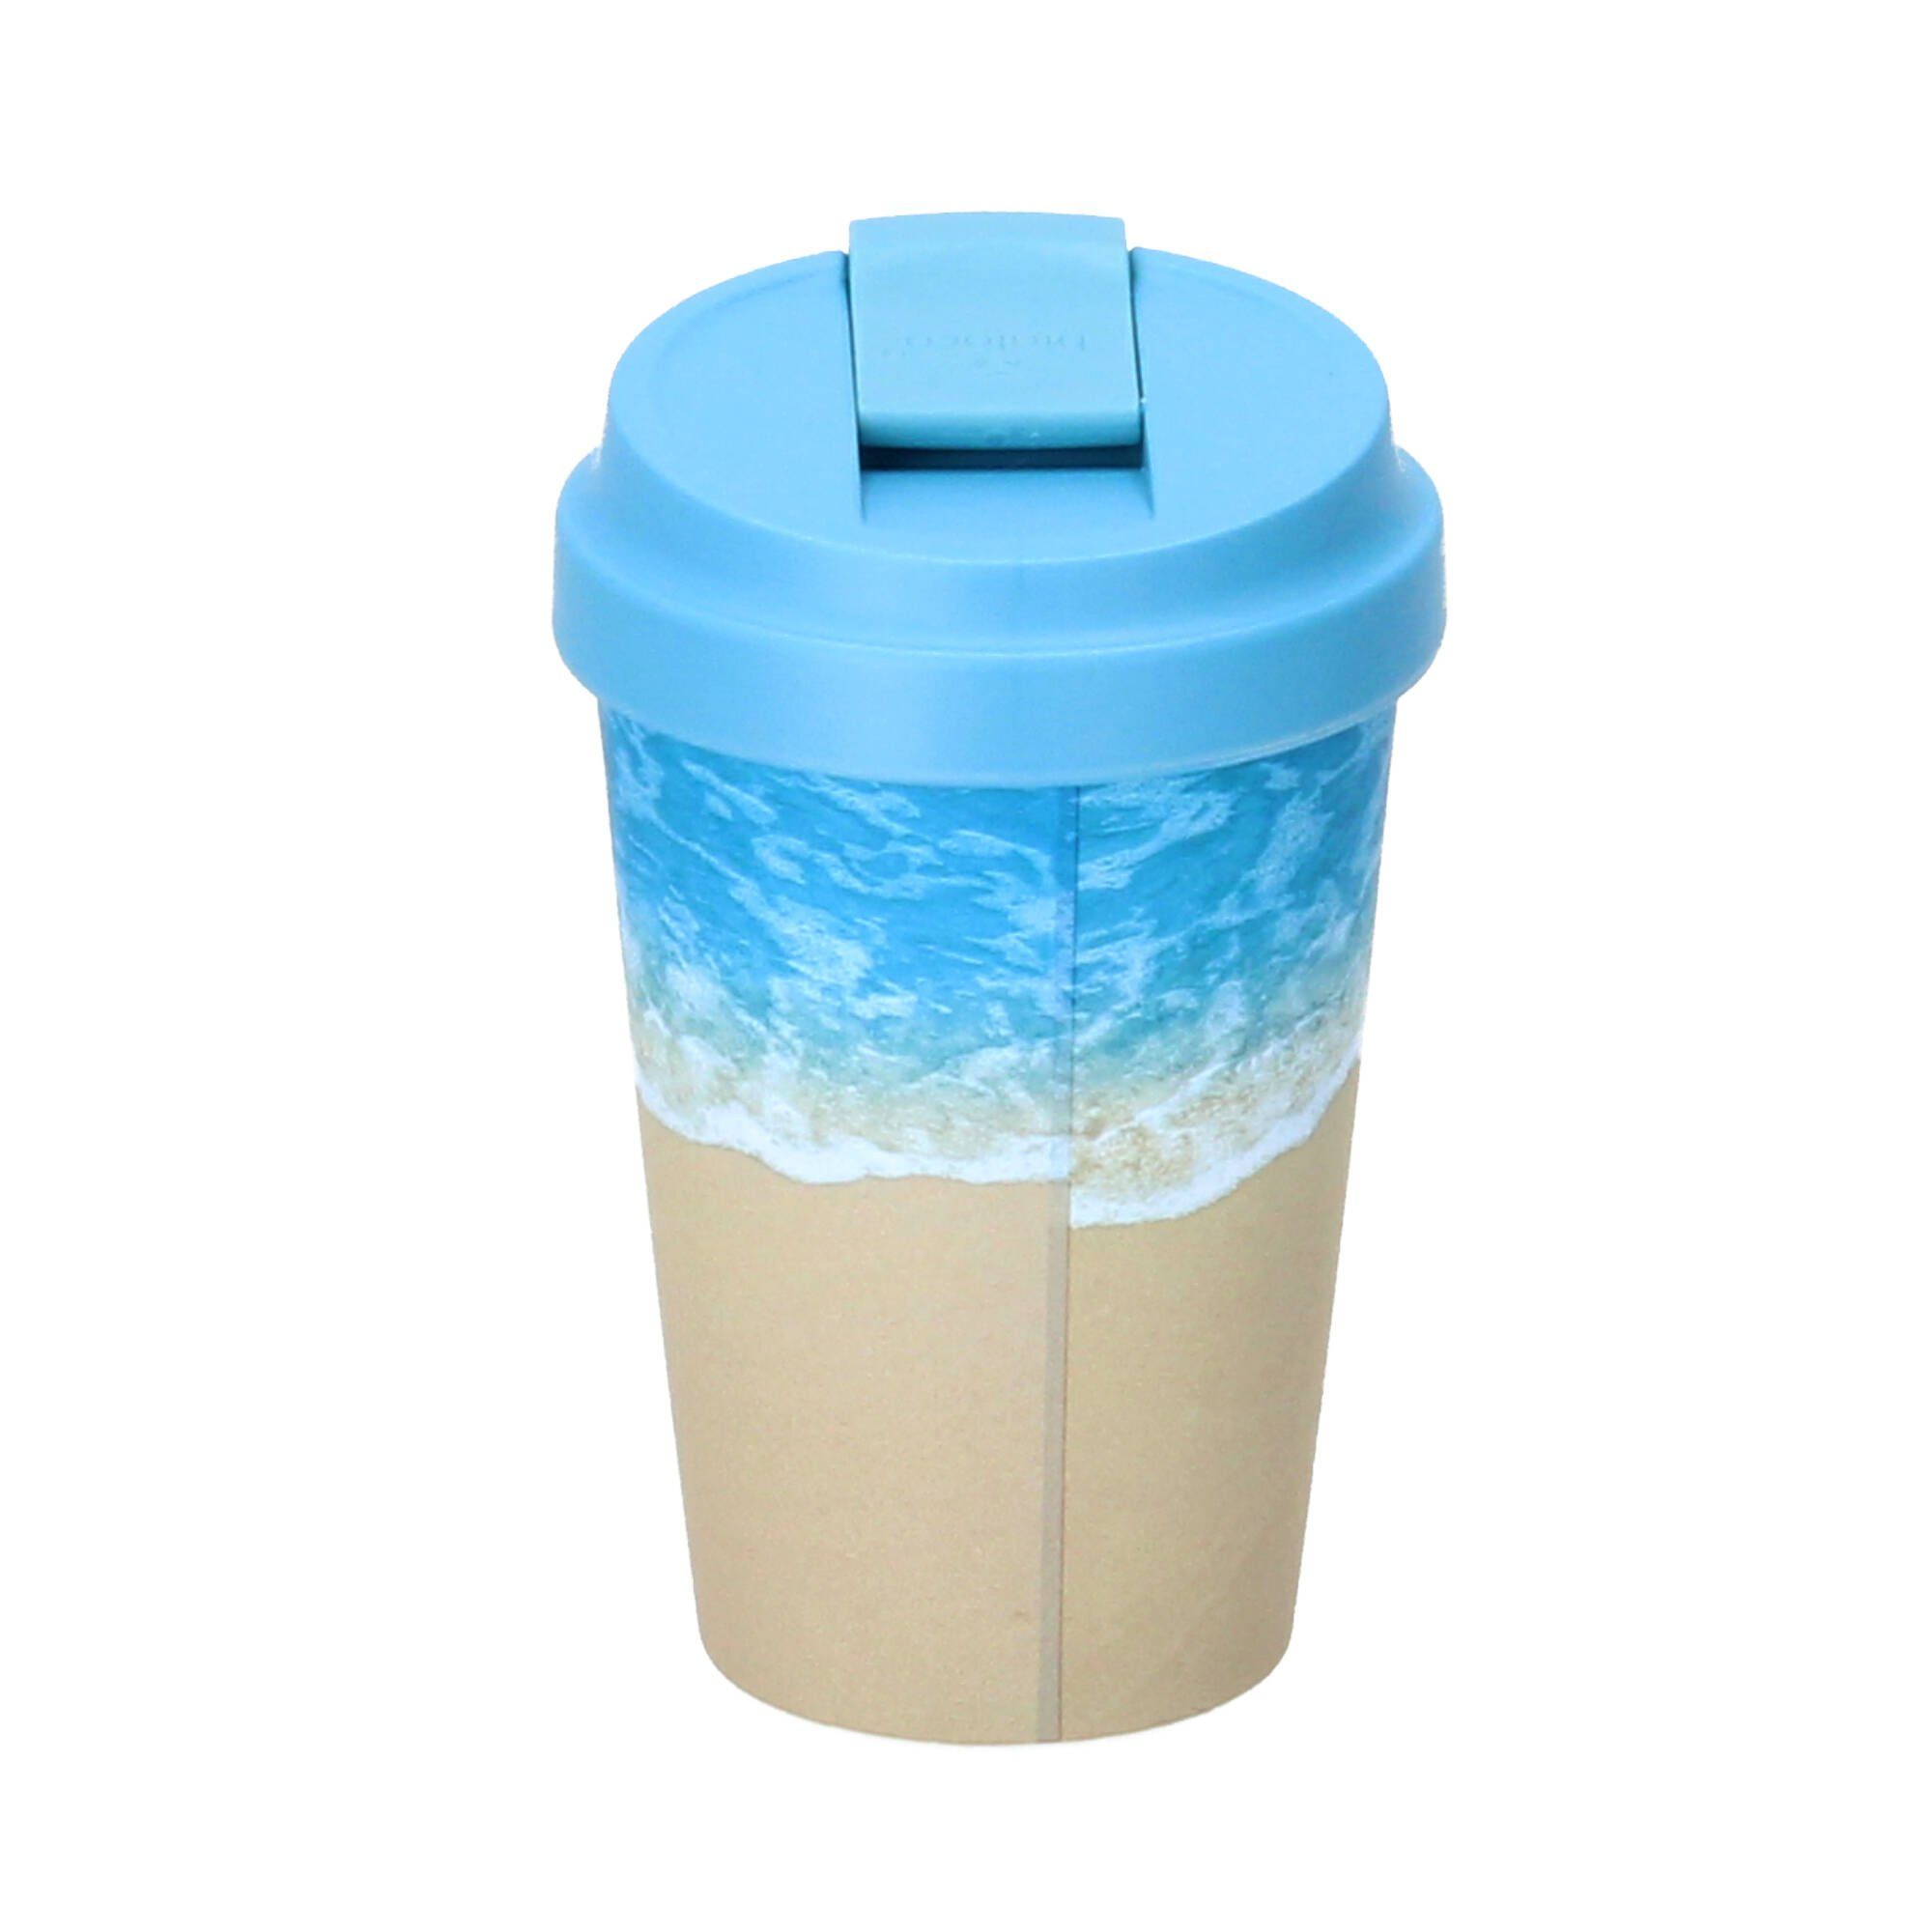 GmbH Pflanzenzucker) cup easy bioloco Coffee-to-go-Becher Place, aus chic plant mic PLA (Kunststoff Favorite